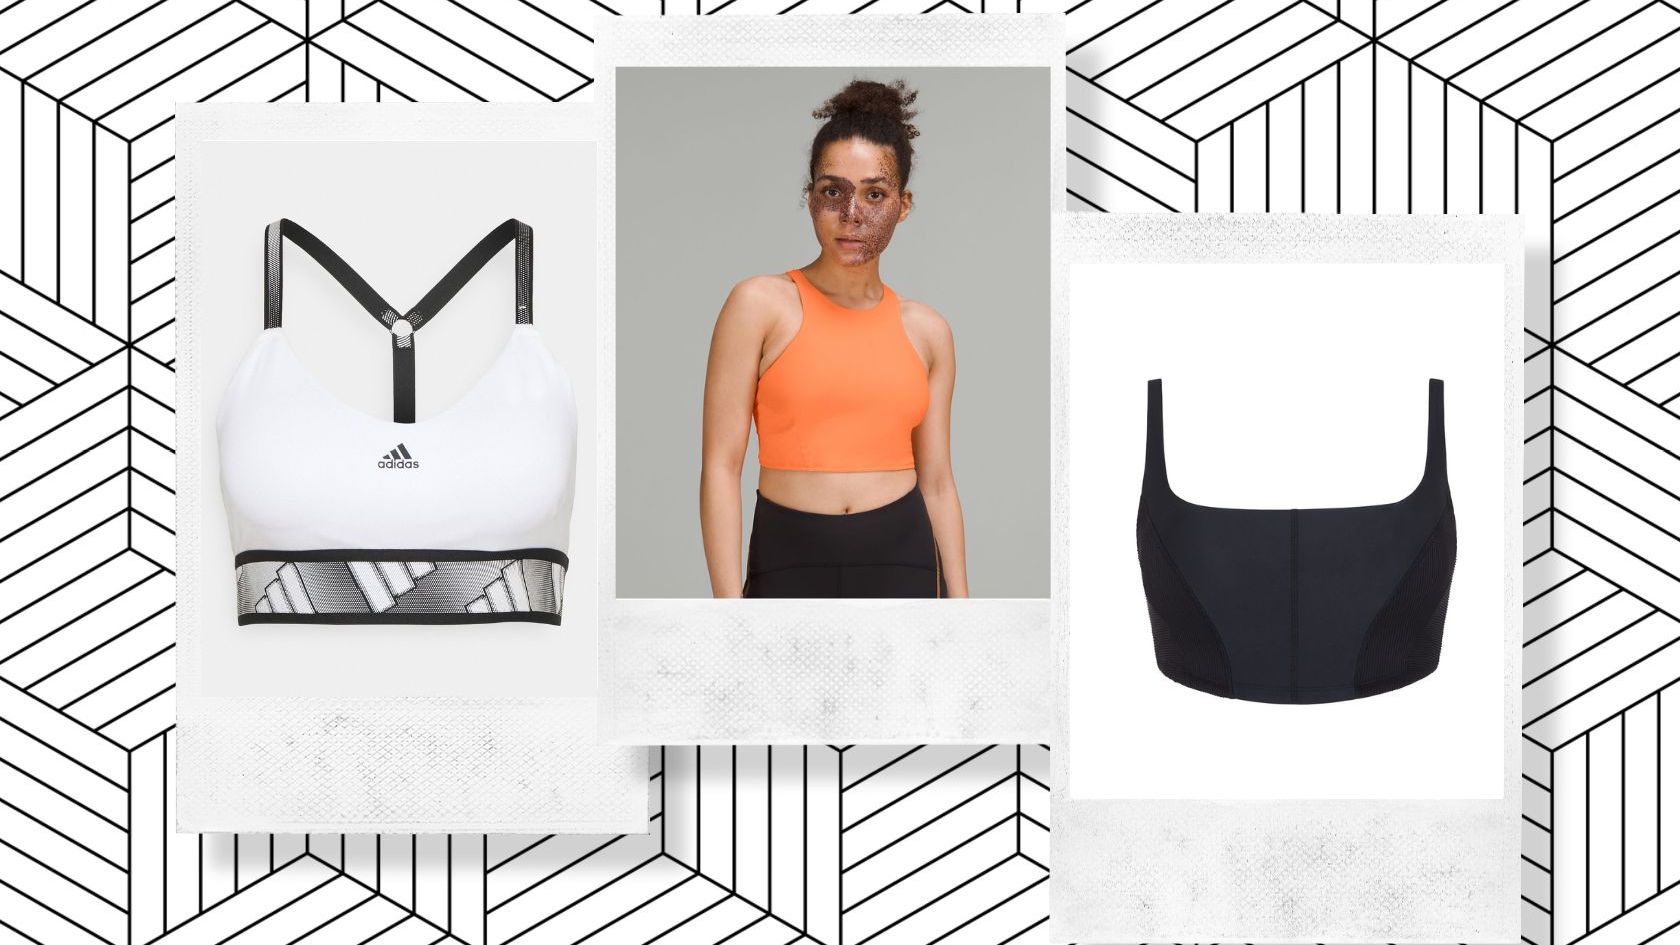 Small boobs? What to look out for when buying a sports bra (and 5